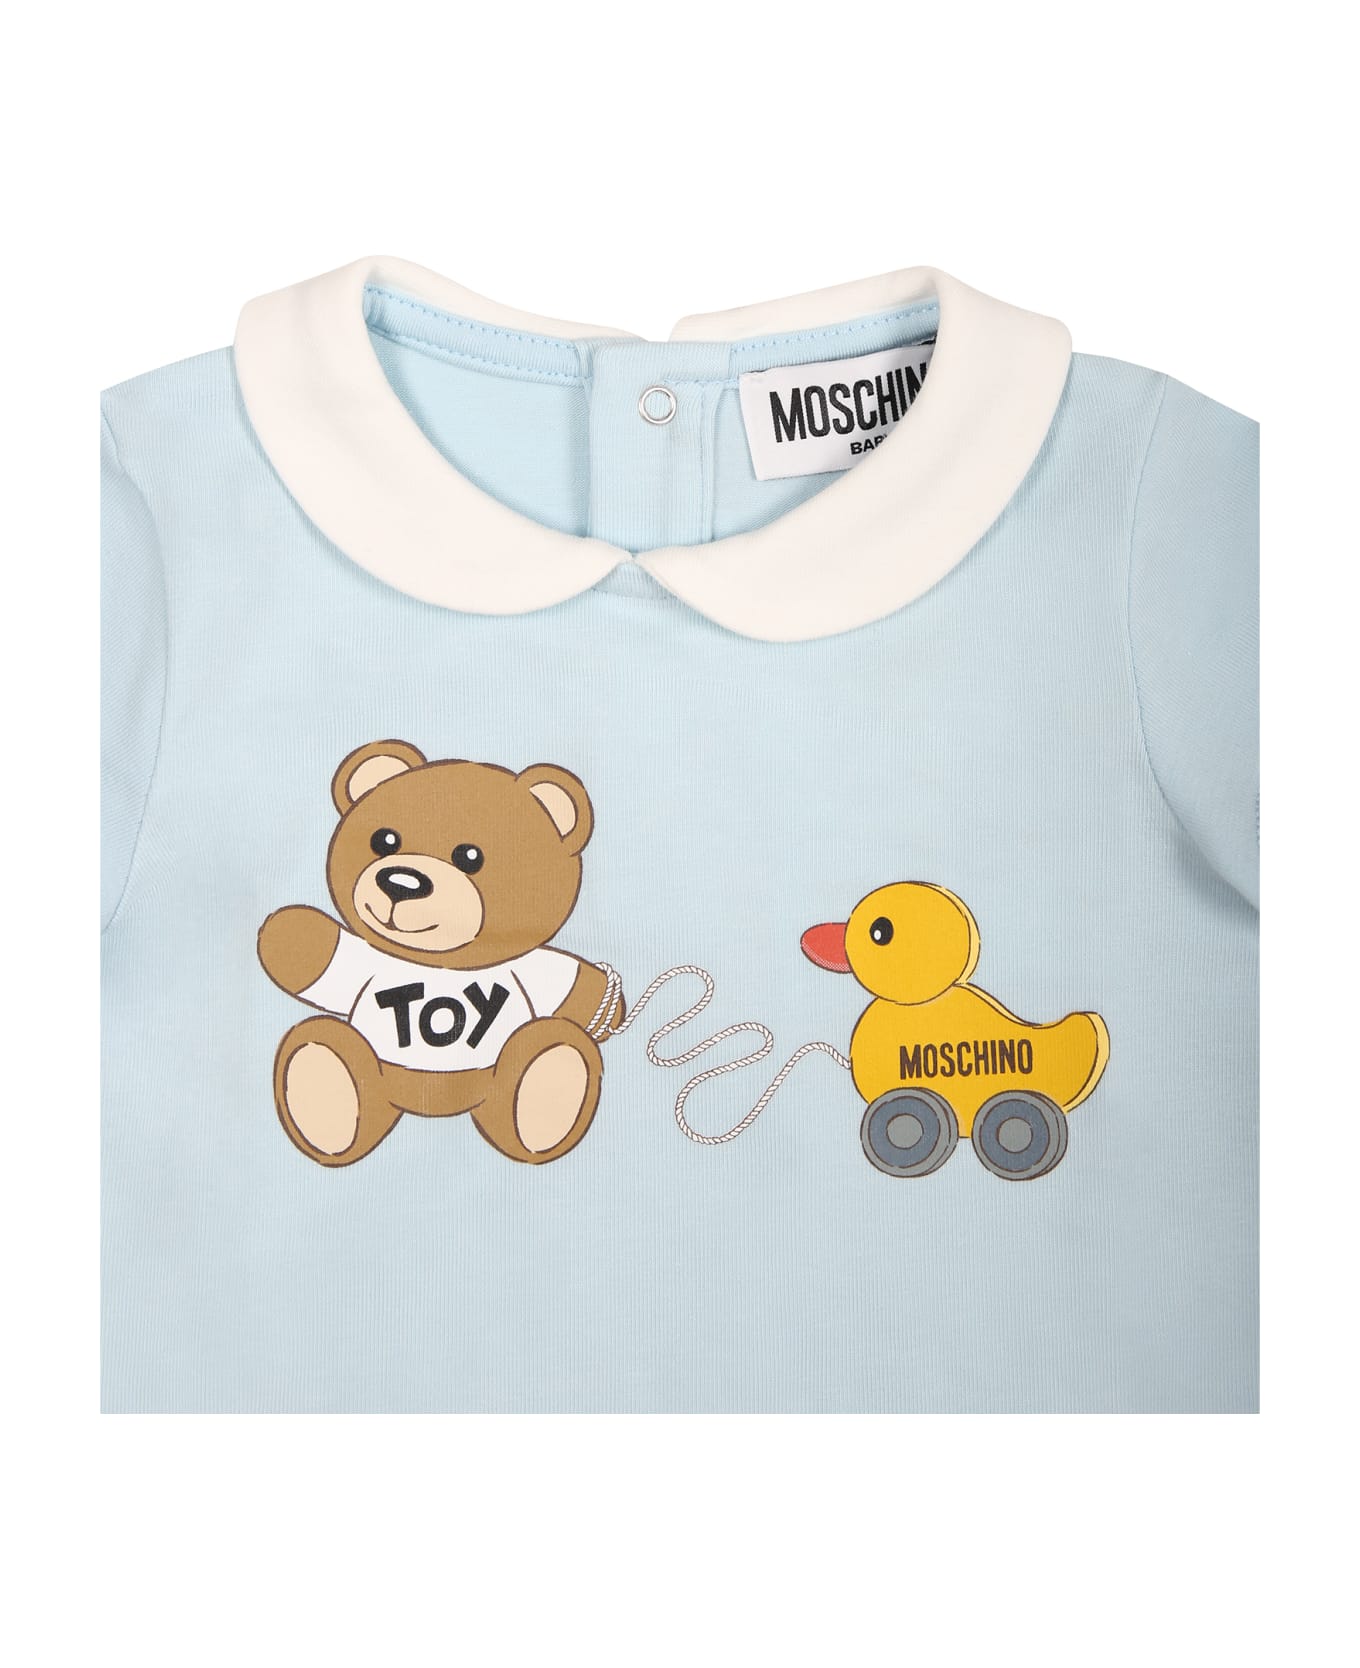 Moschino Light Blue Bodysuit For Baby Boy With Teddy Bear And Duck - Light Blue ボディスーツ＆セットアップ